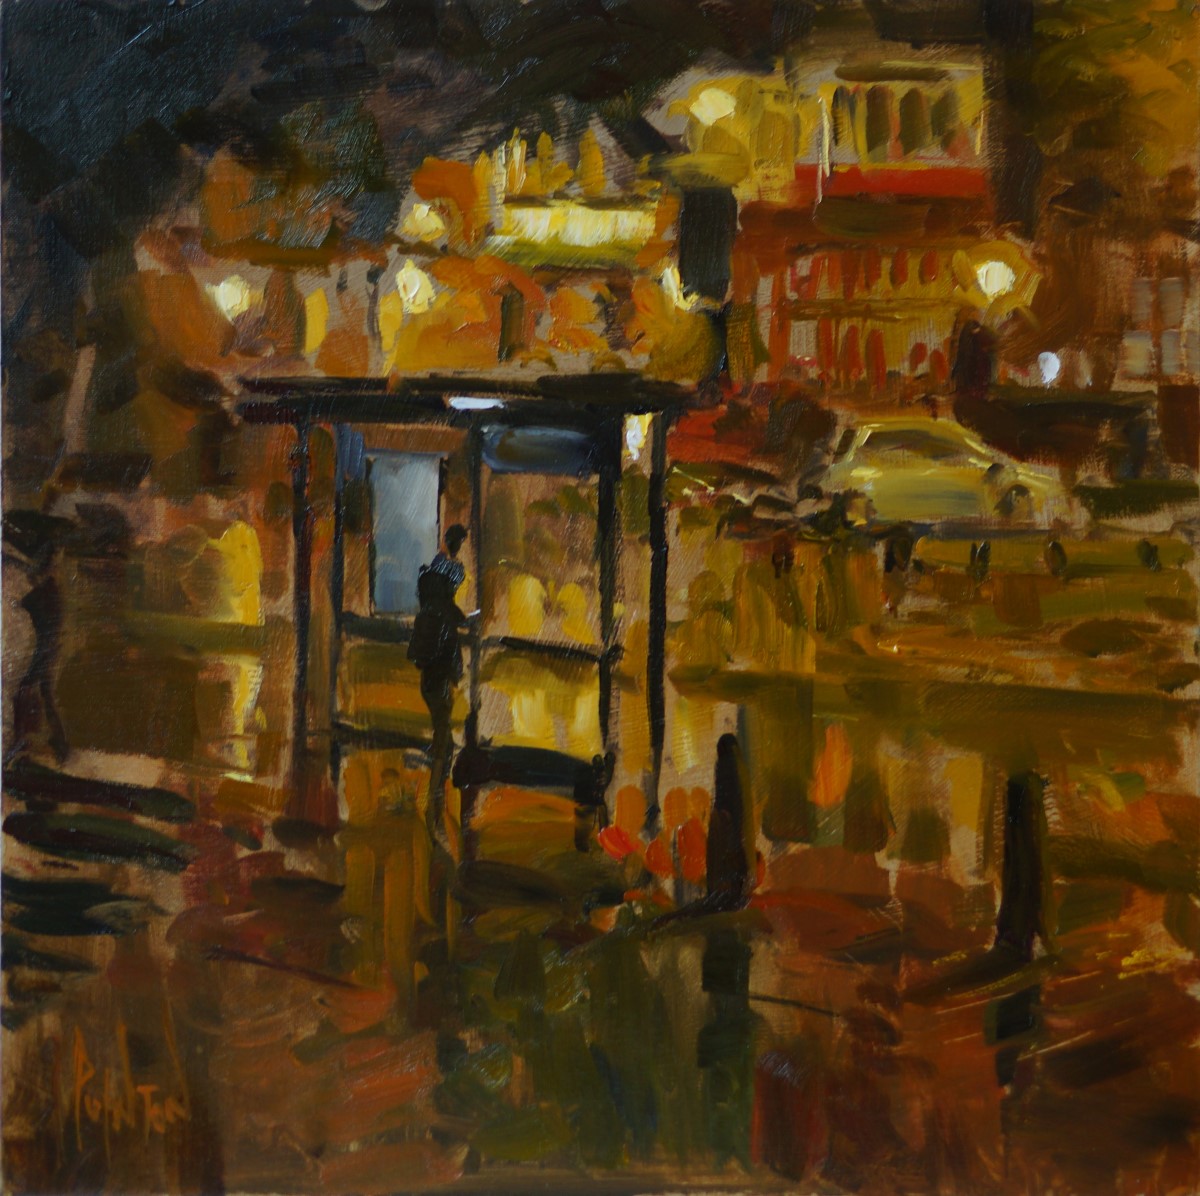 Rob Pointon, 'Waiting for the Night Bus', Tombland, Oil, 40x40cm, <a href='http://www.paintout.org/artists/rob-pointon#buy' target='_blank'>FOR SALE</a>, £650